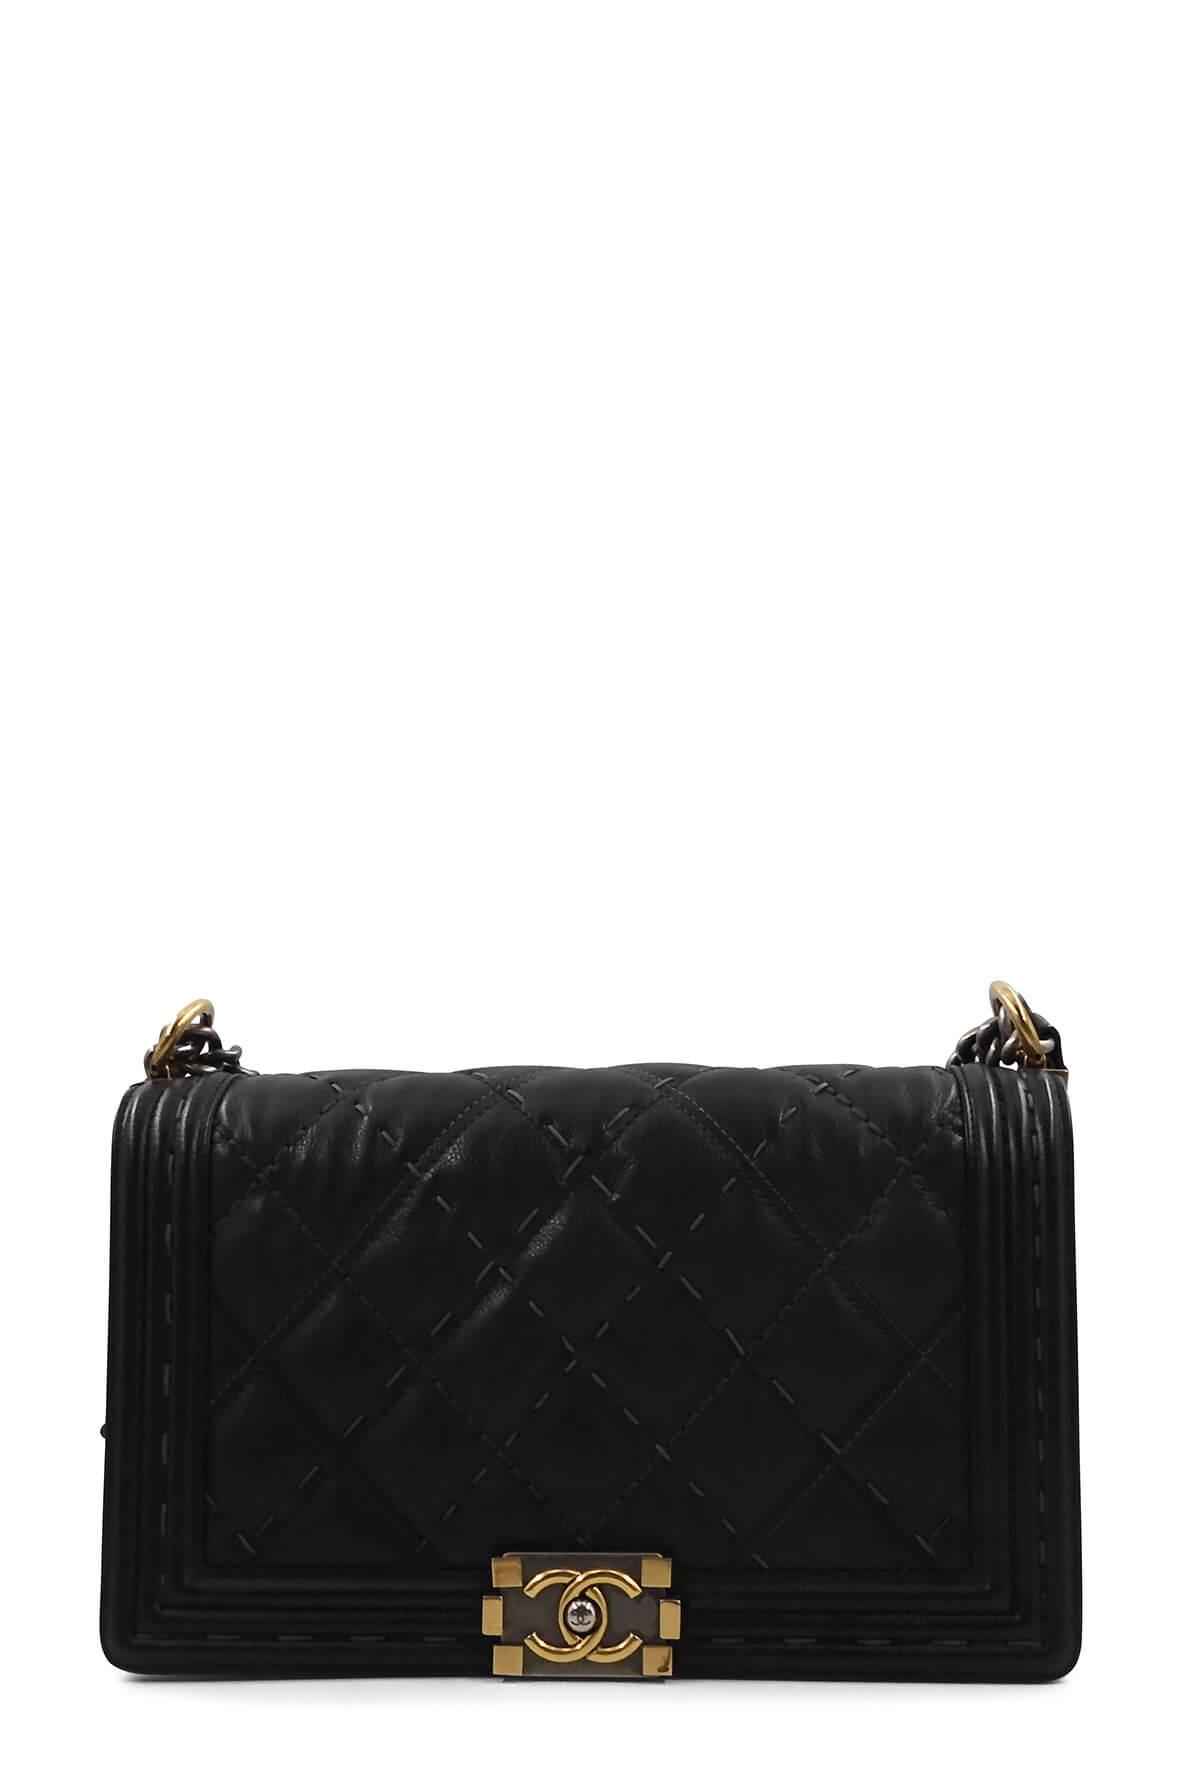 Chanel Double Stitch Boy Flap Bag Quilted Calfskin Large at